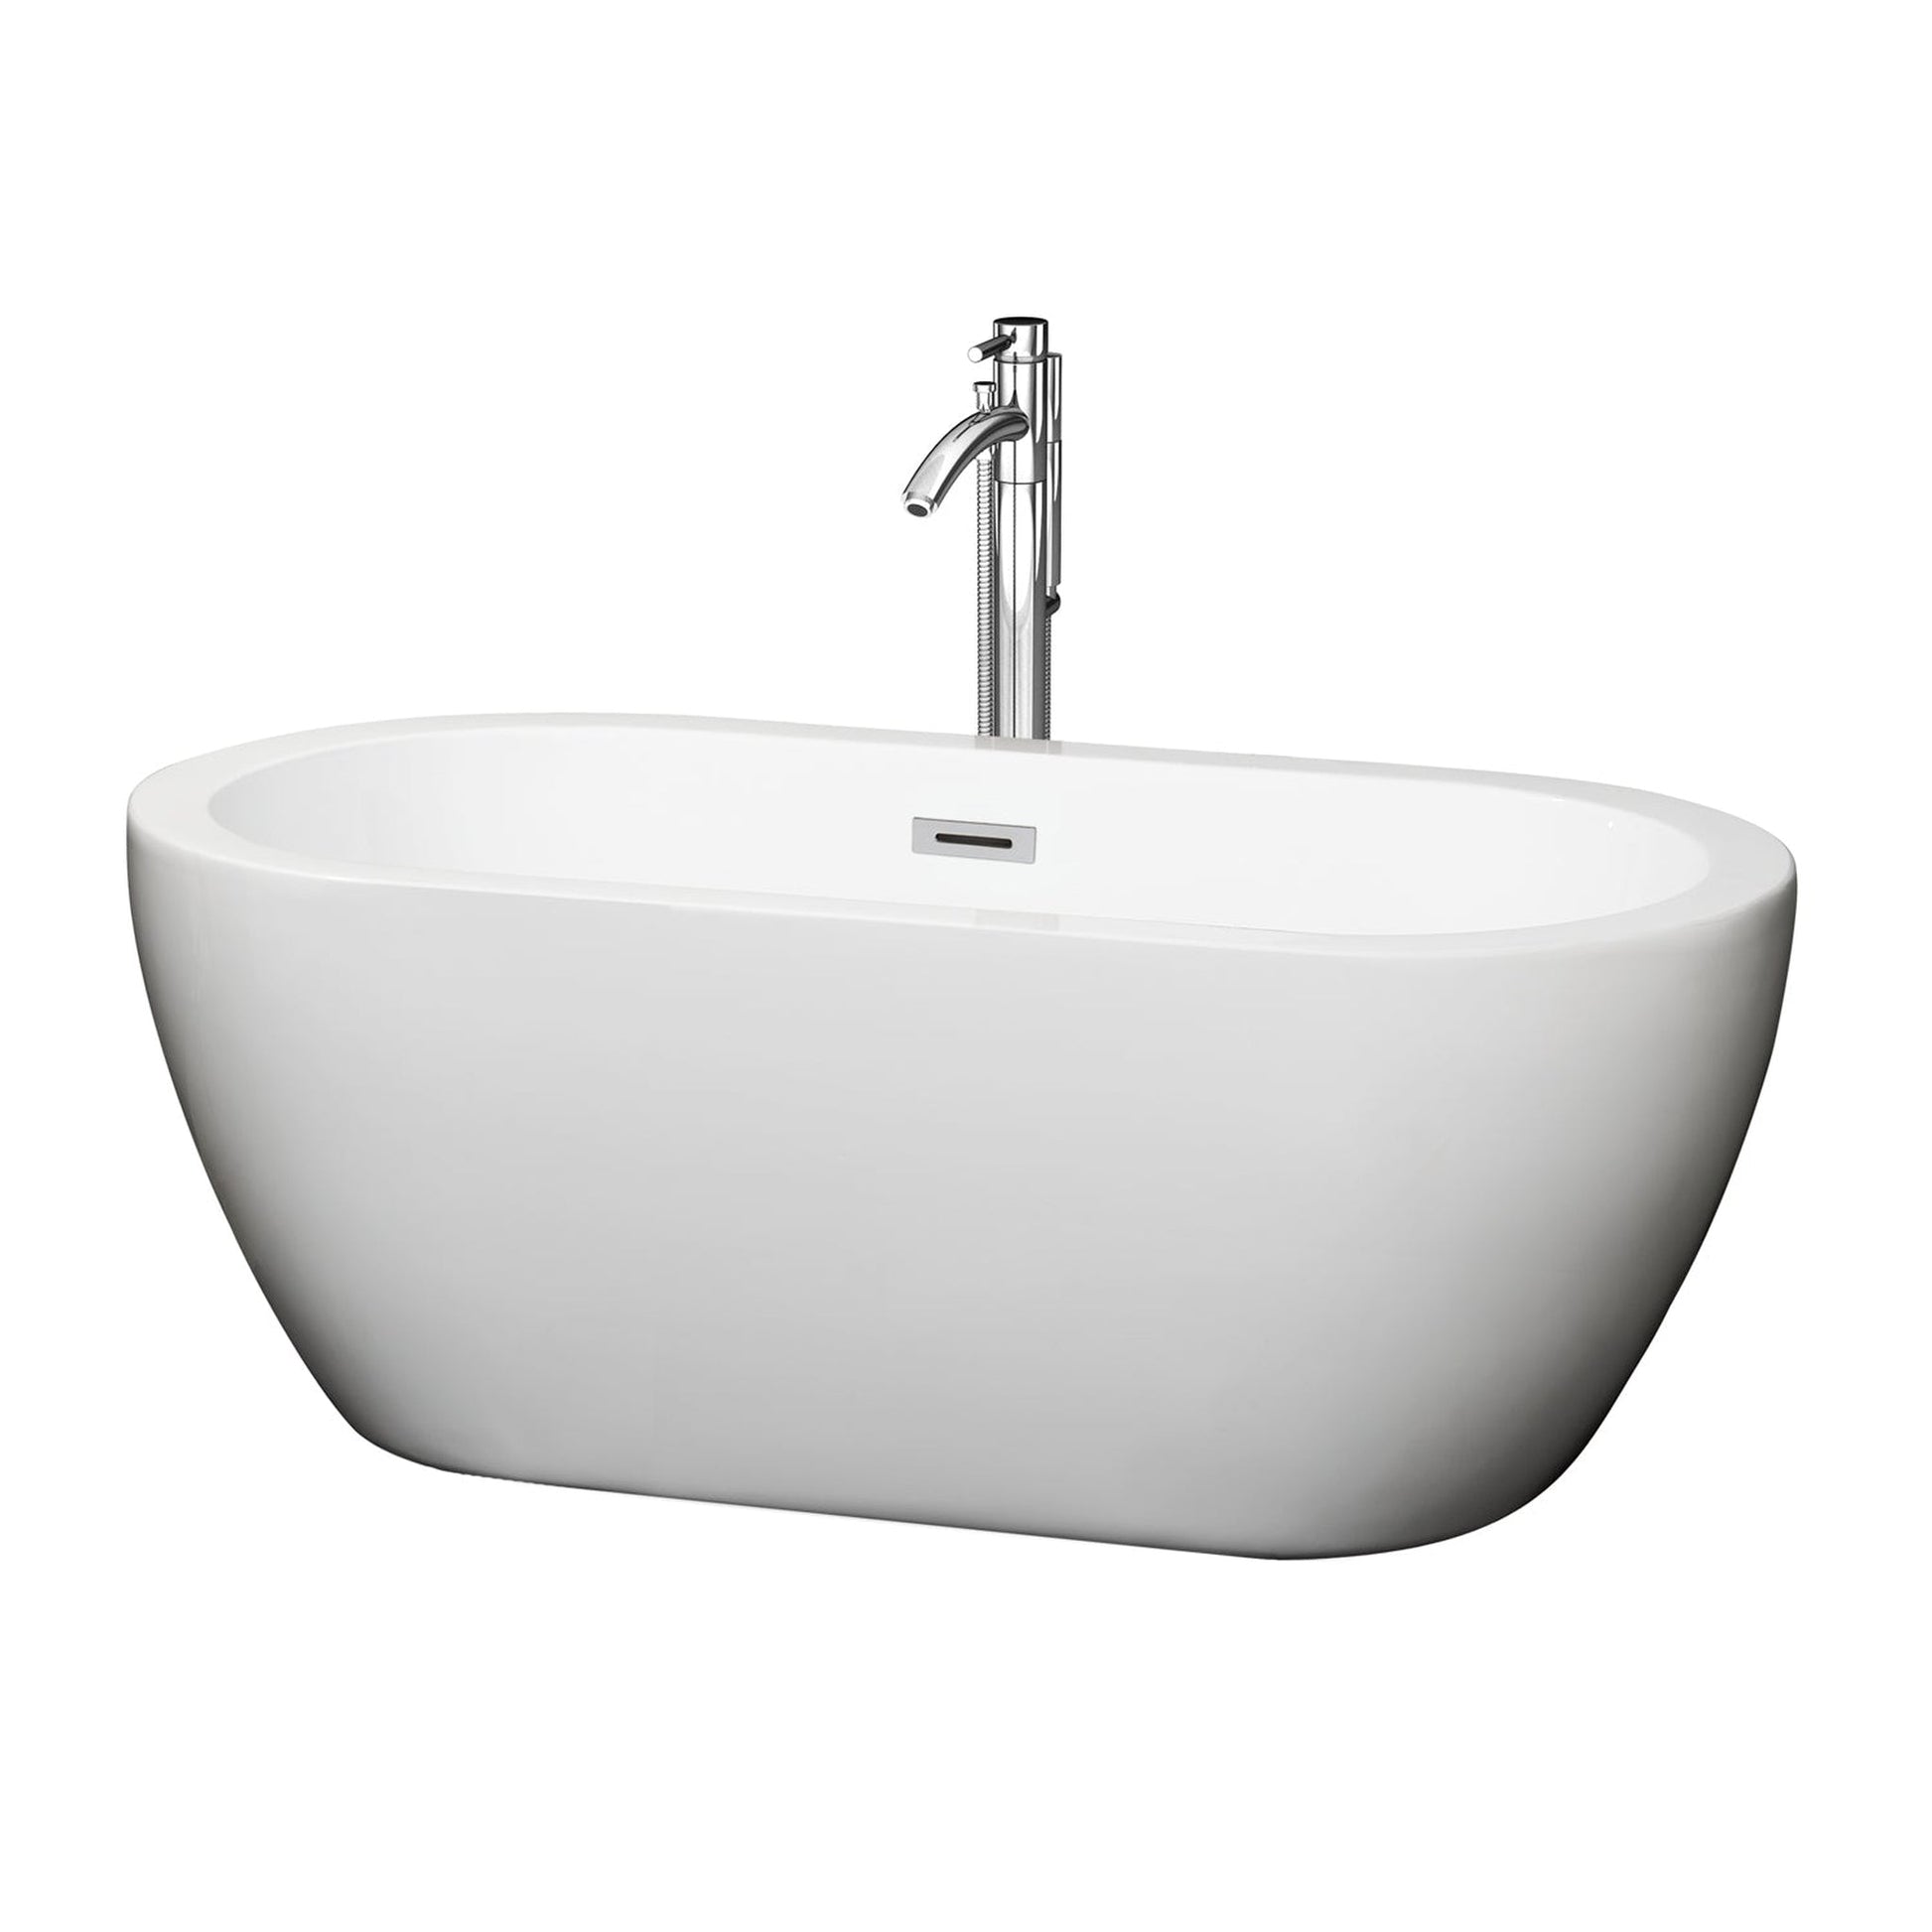 Wyndham Collection Soho 60" Freestanding Bathtub in White With Floor Mounted Faucet, Drain and Overflow Trim in Polished Chrome